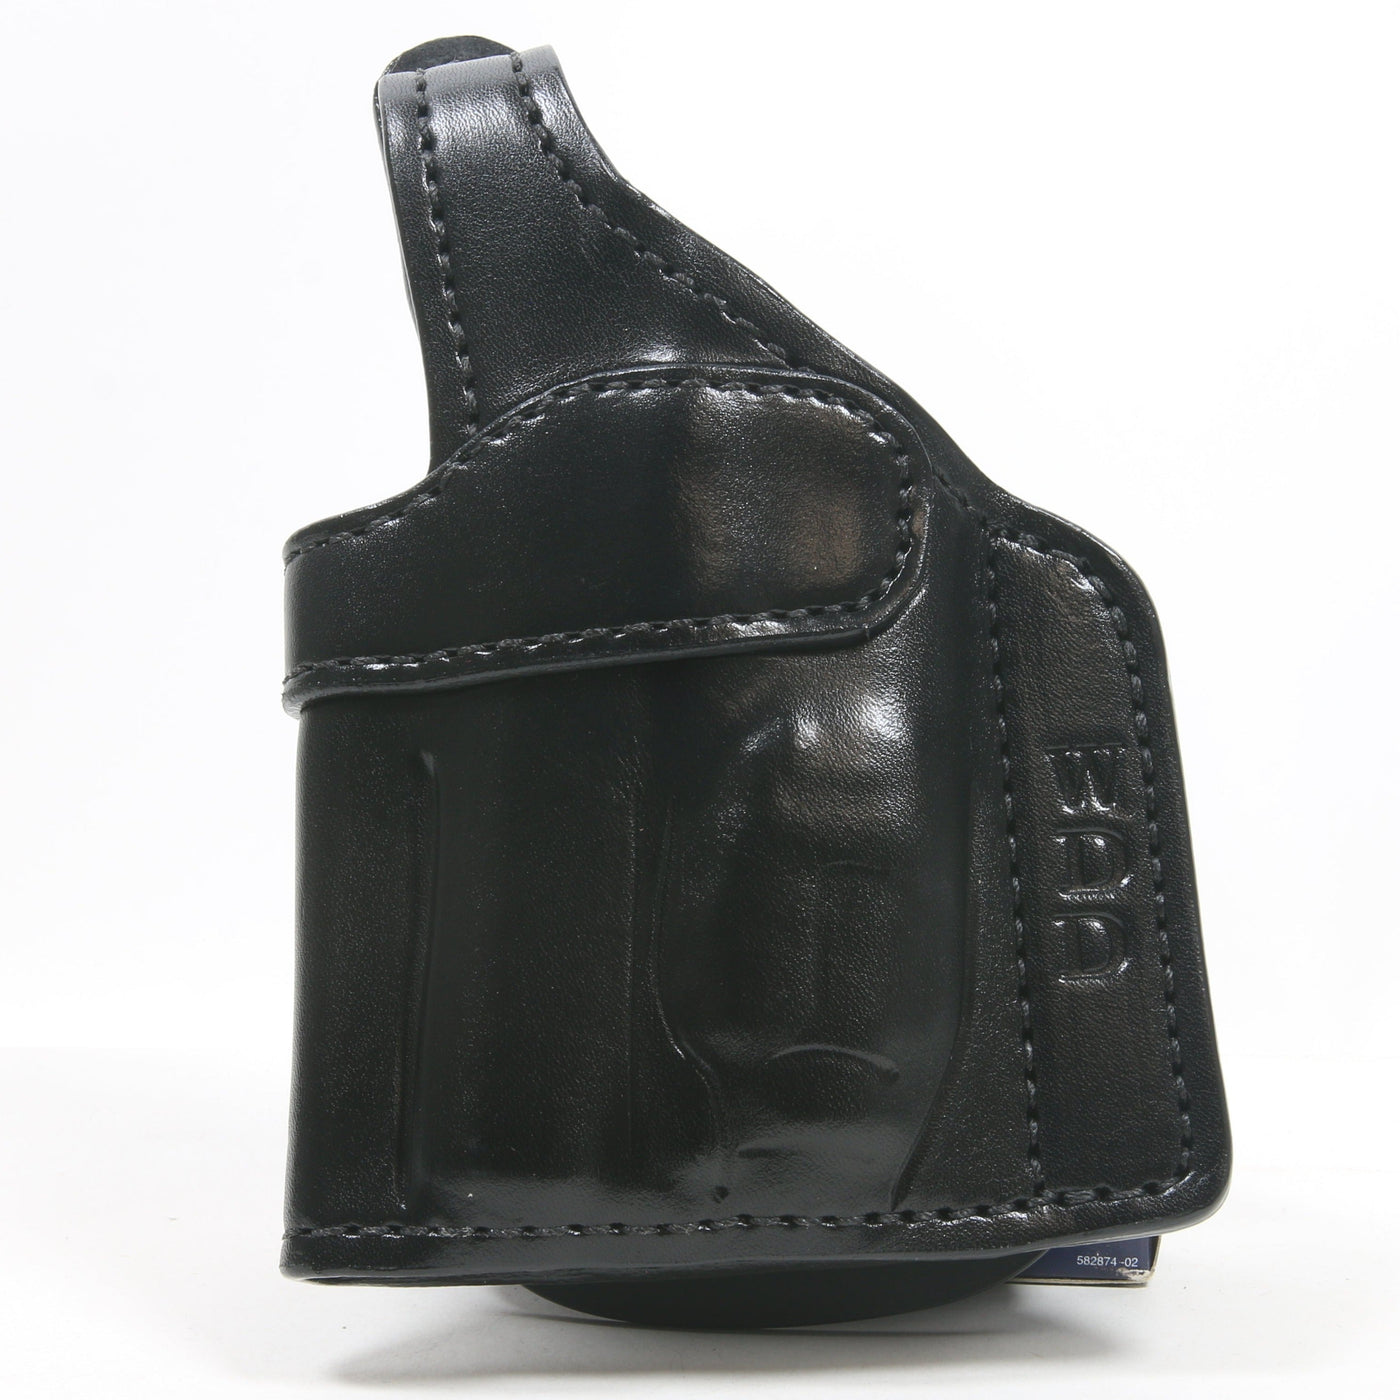 Cross Draw Holster WC SFX9 HC 4" Solid Frame X-TAC 15 Round w/ Optic and Streamlight TLR7A